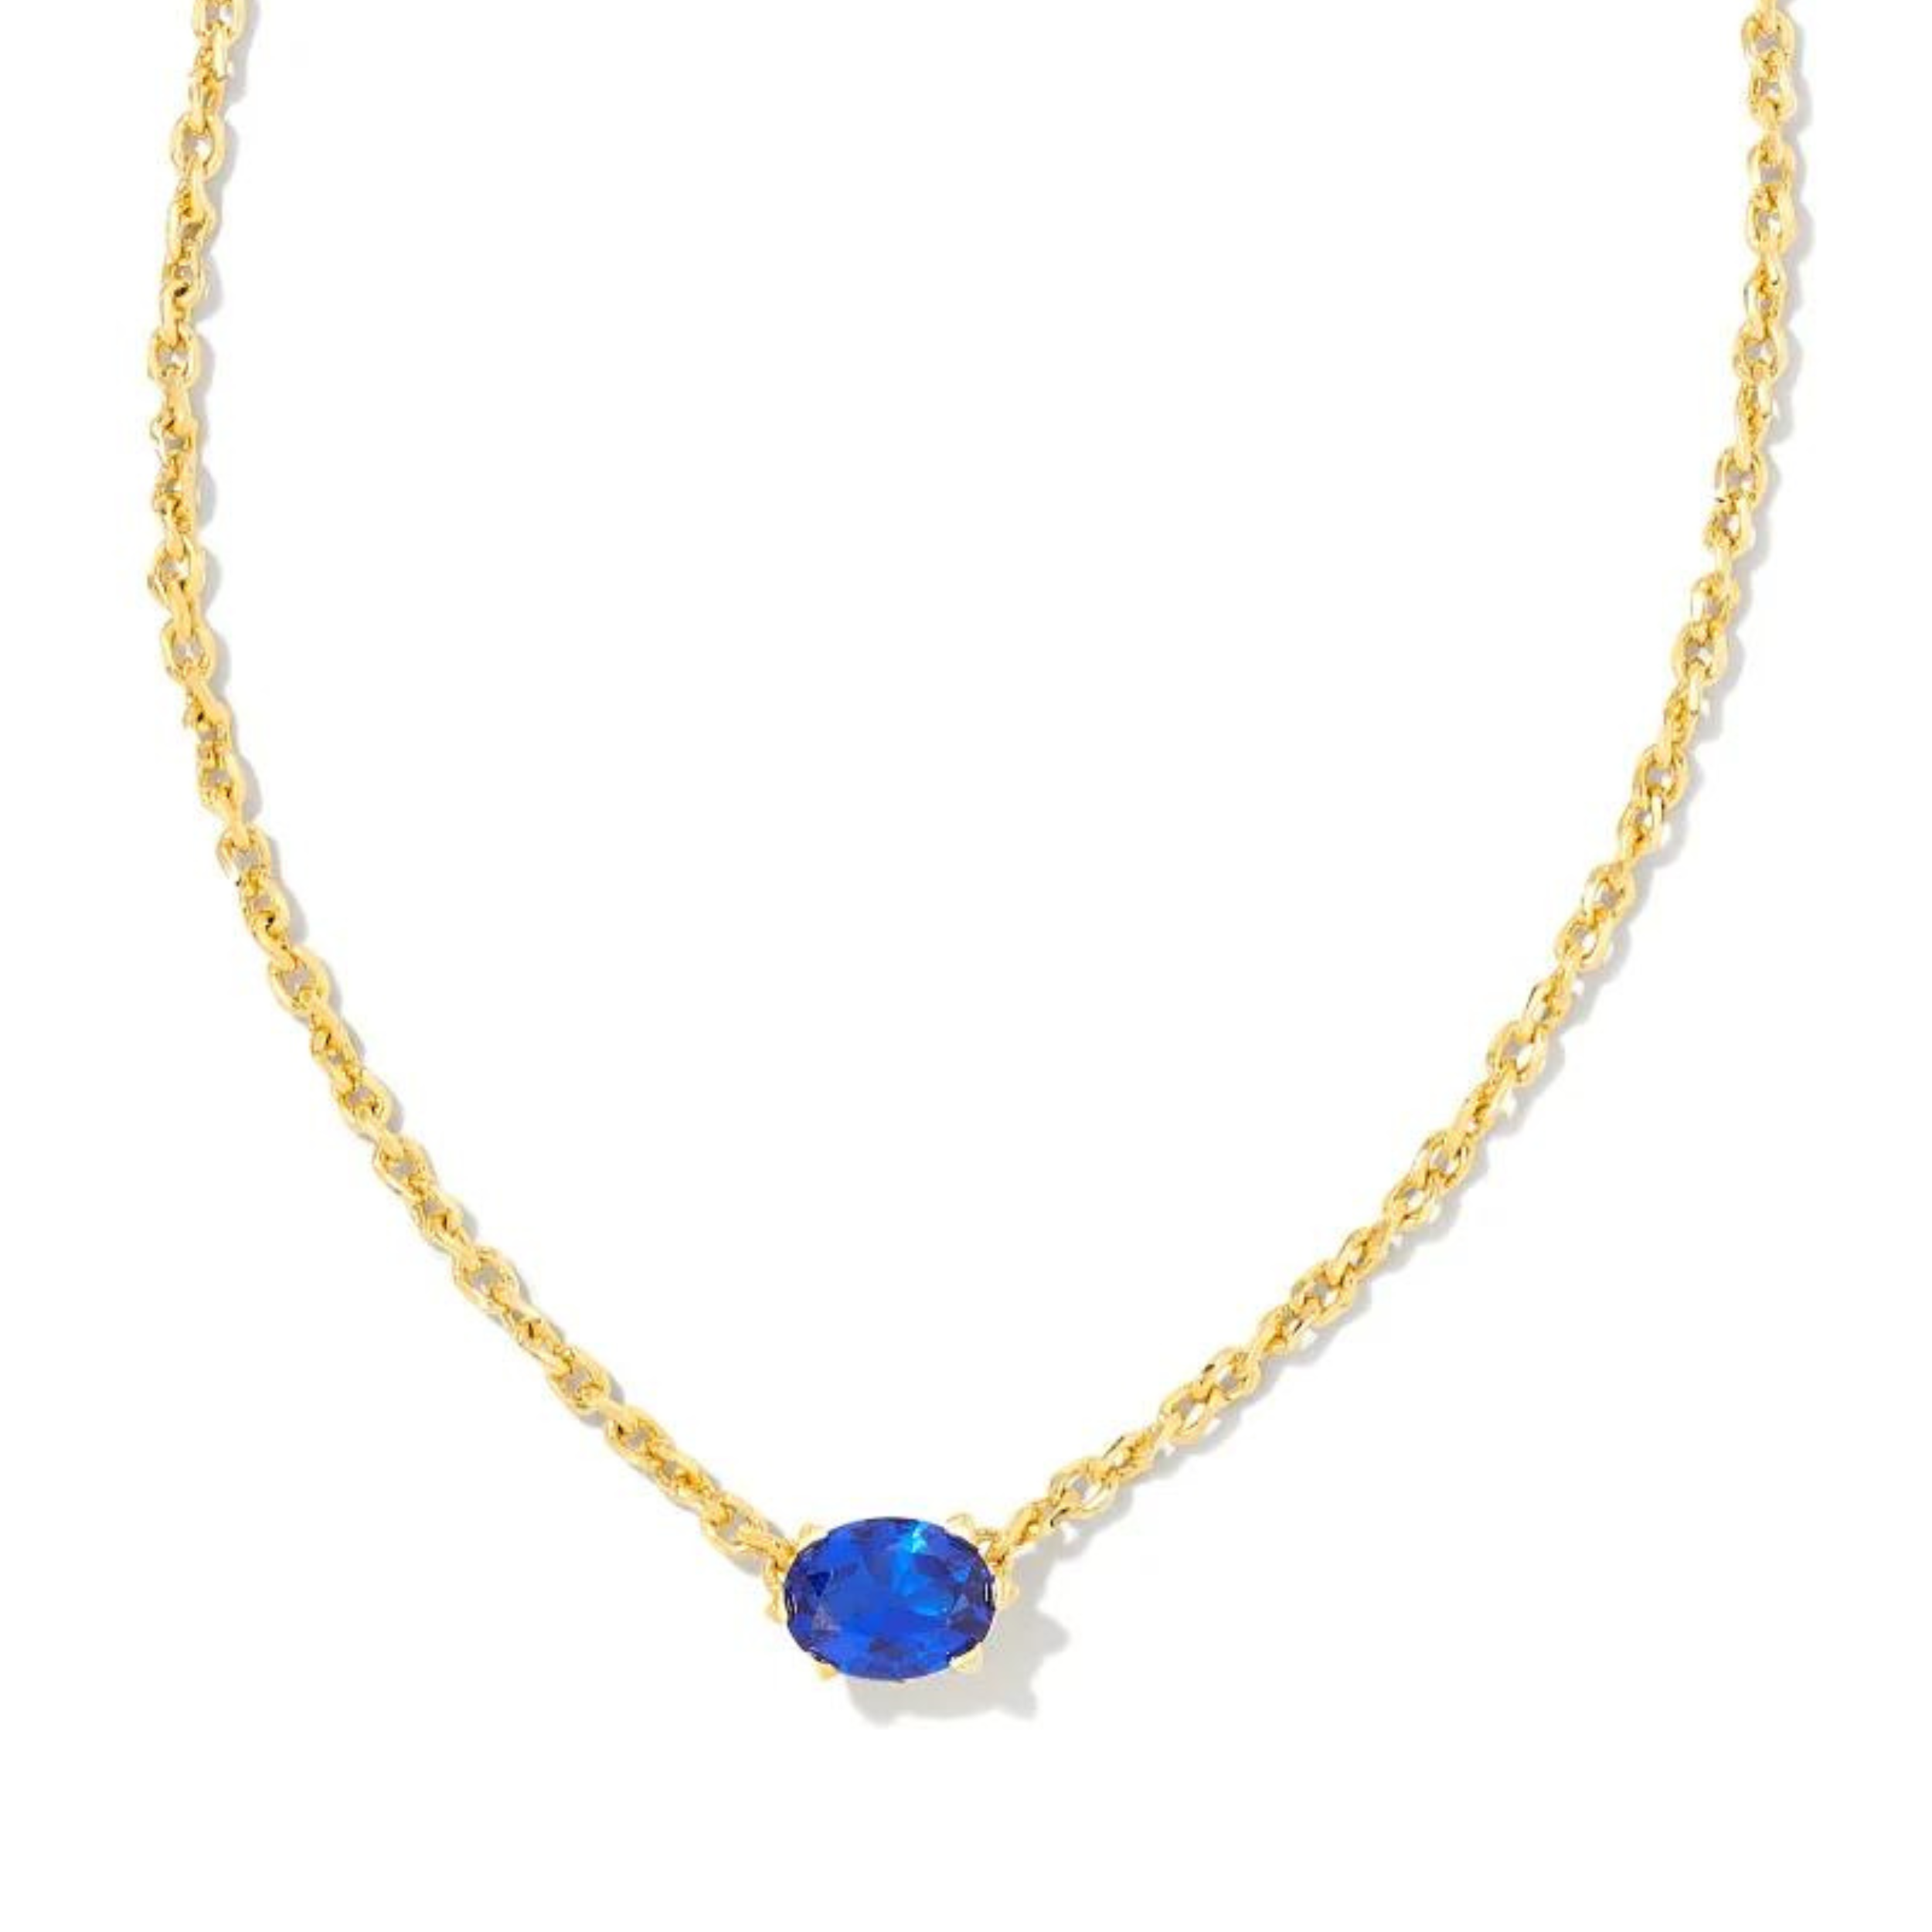 Gold chain necklace with a blue crystal pendant, pictured on a white background.